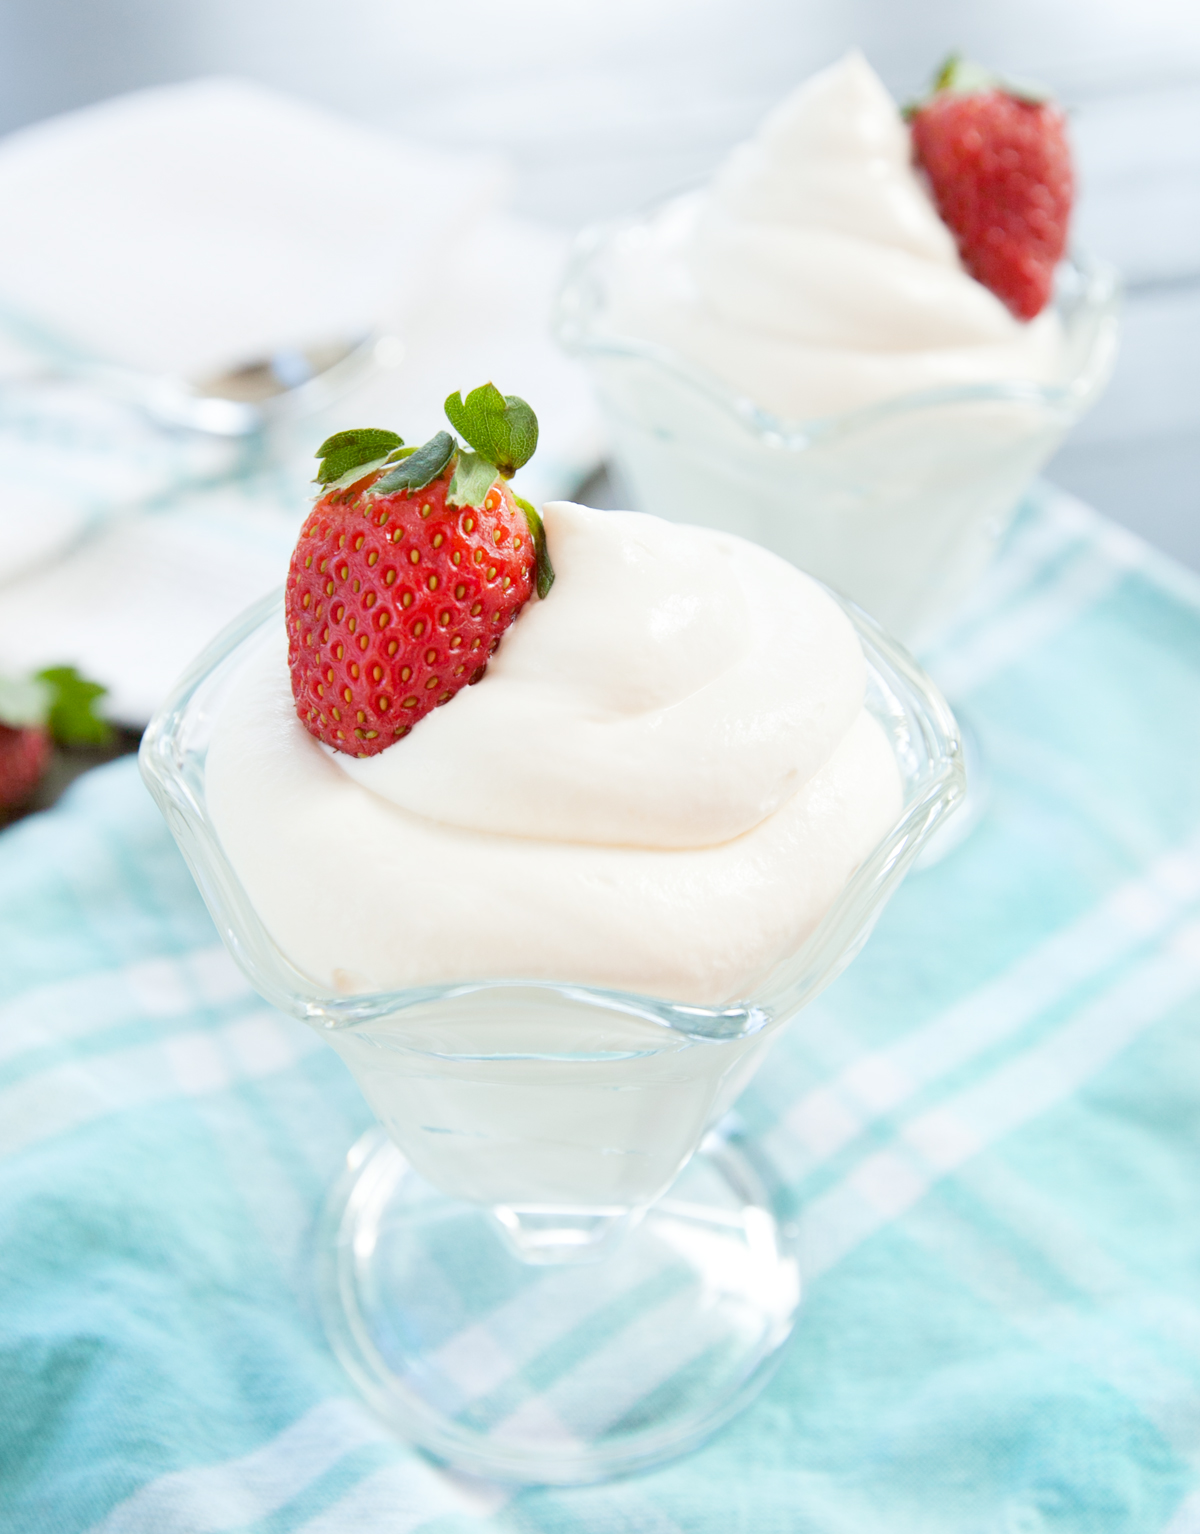 An old-fashioned ice cream dish filled with pillows of cream cheese mousse, garnished with a fresh strawberry.